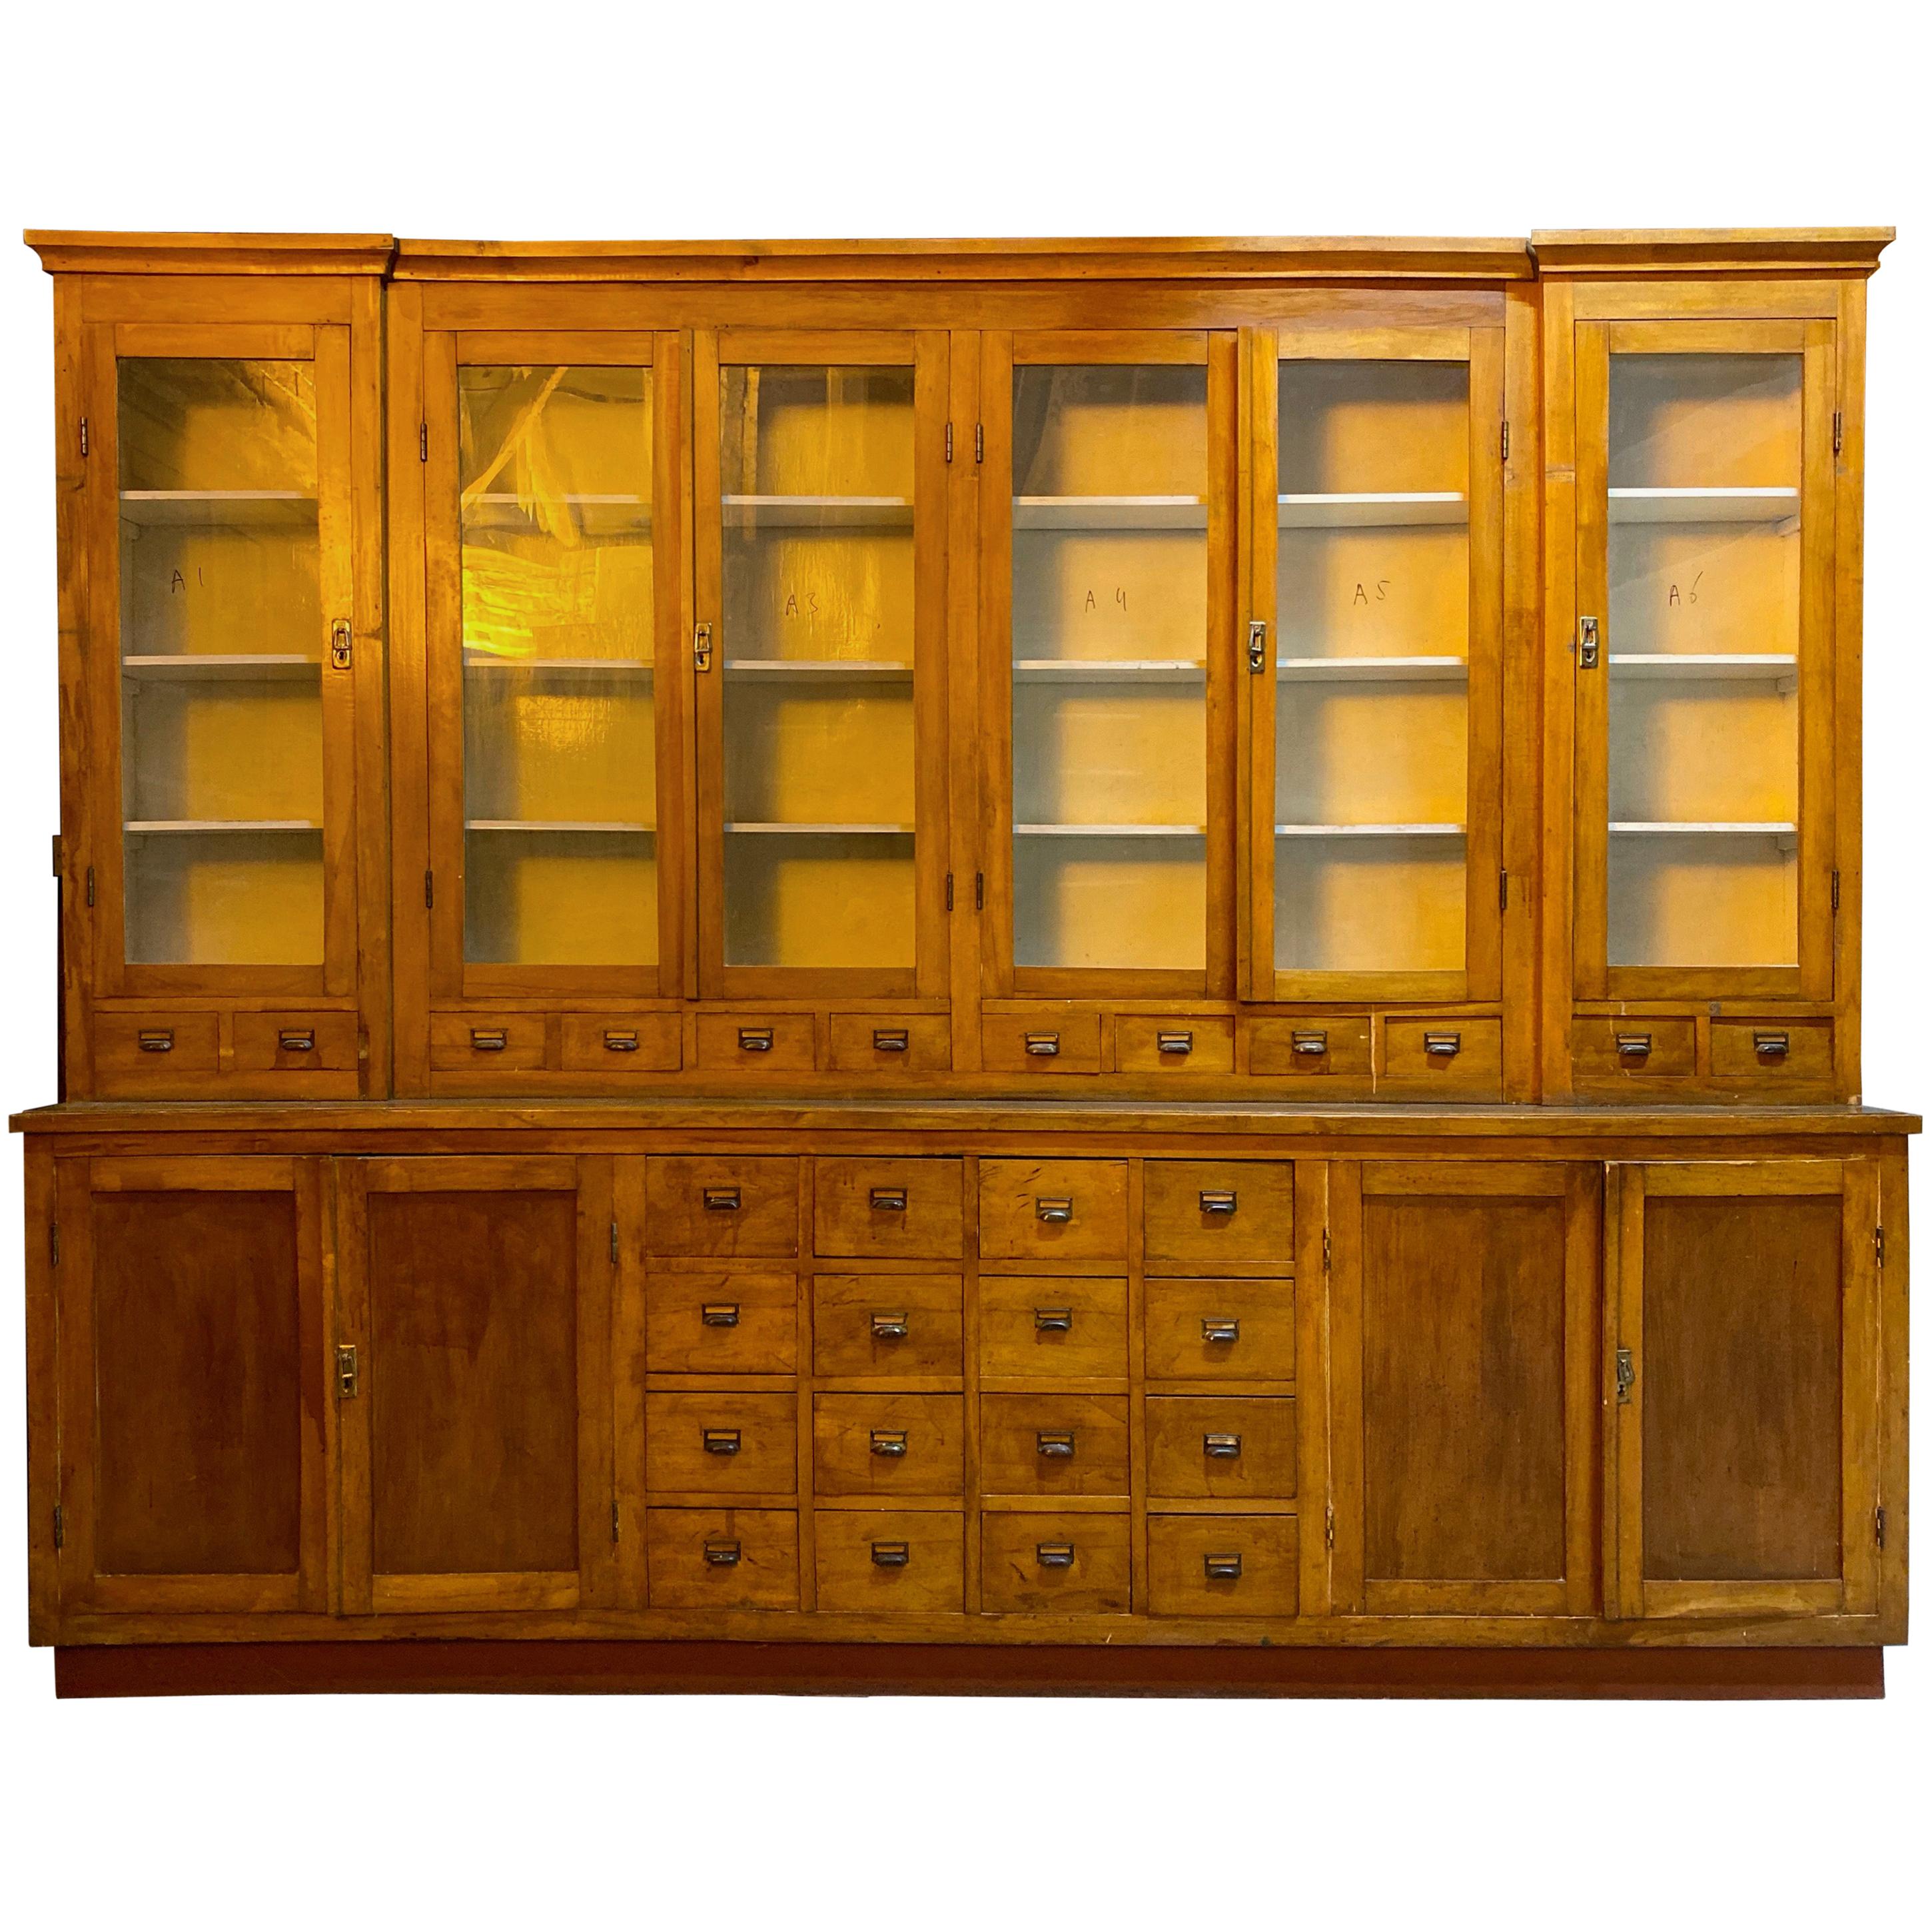 Large Apothecary Display Cabinet Pharmacy Chemist Shop circa 1920s Number 3